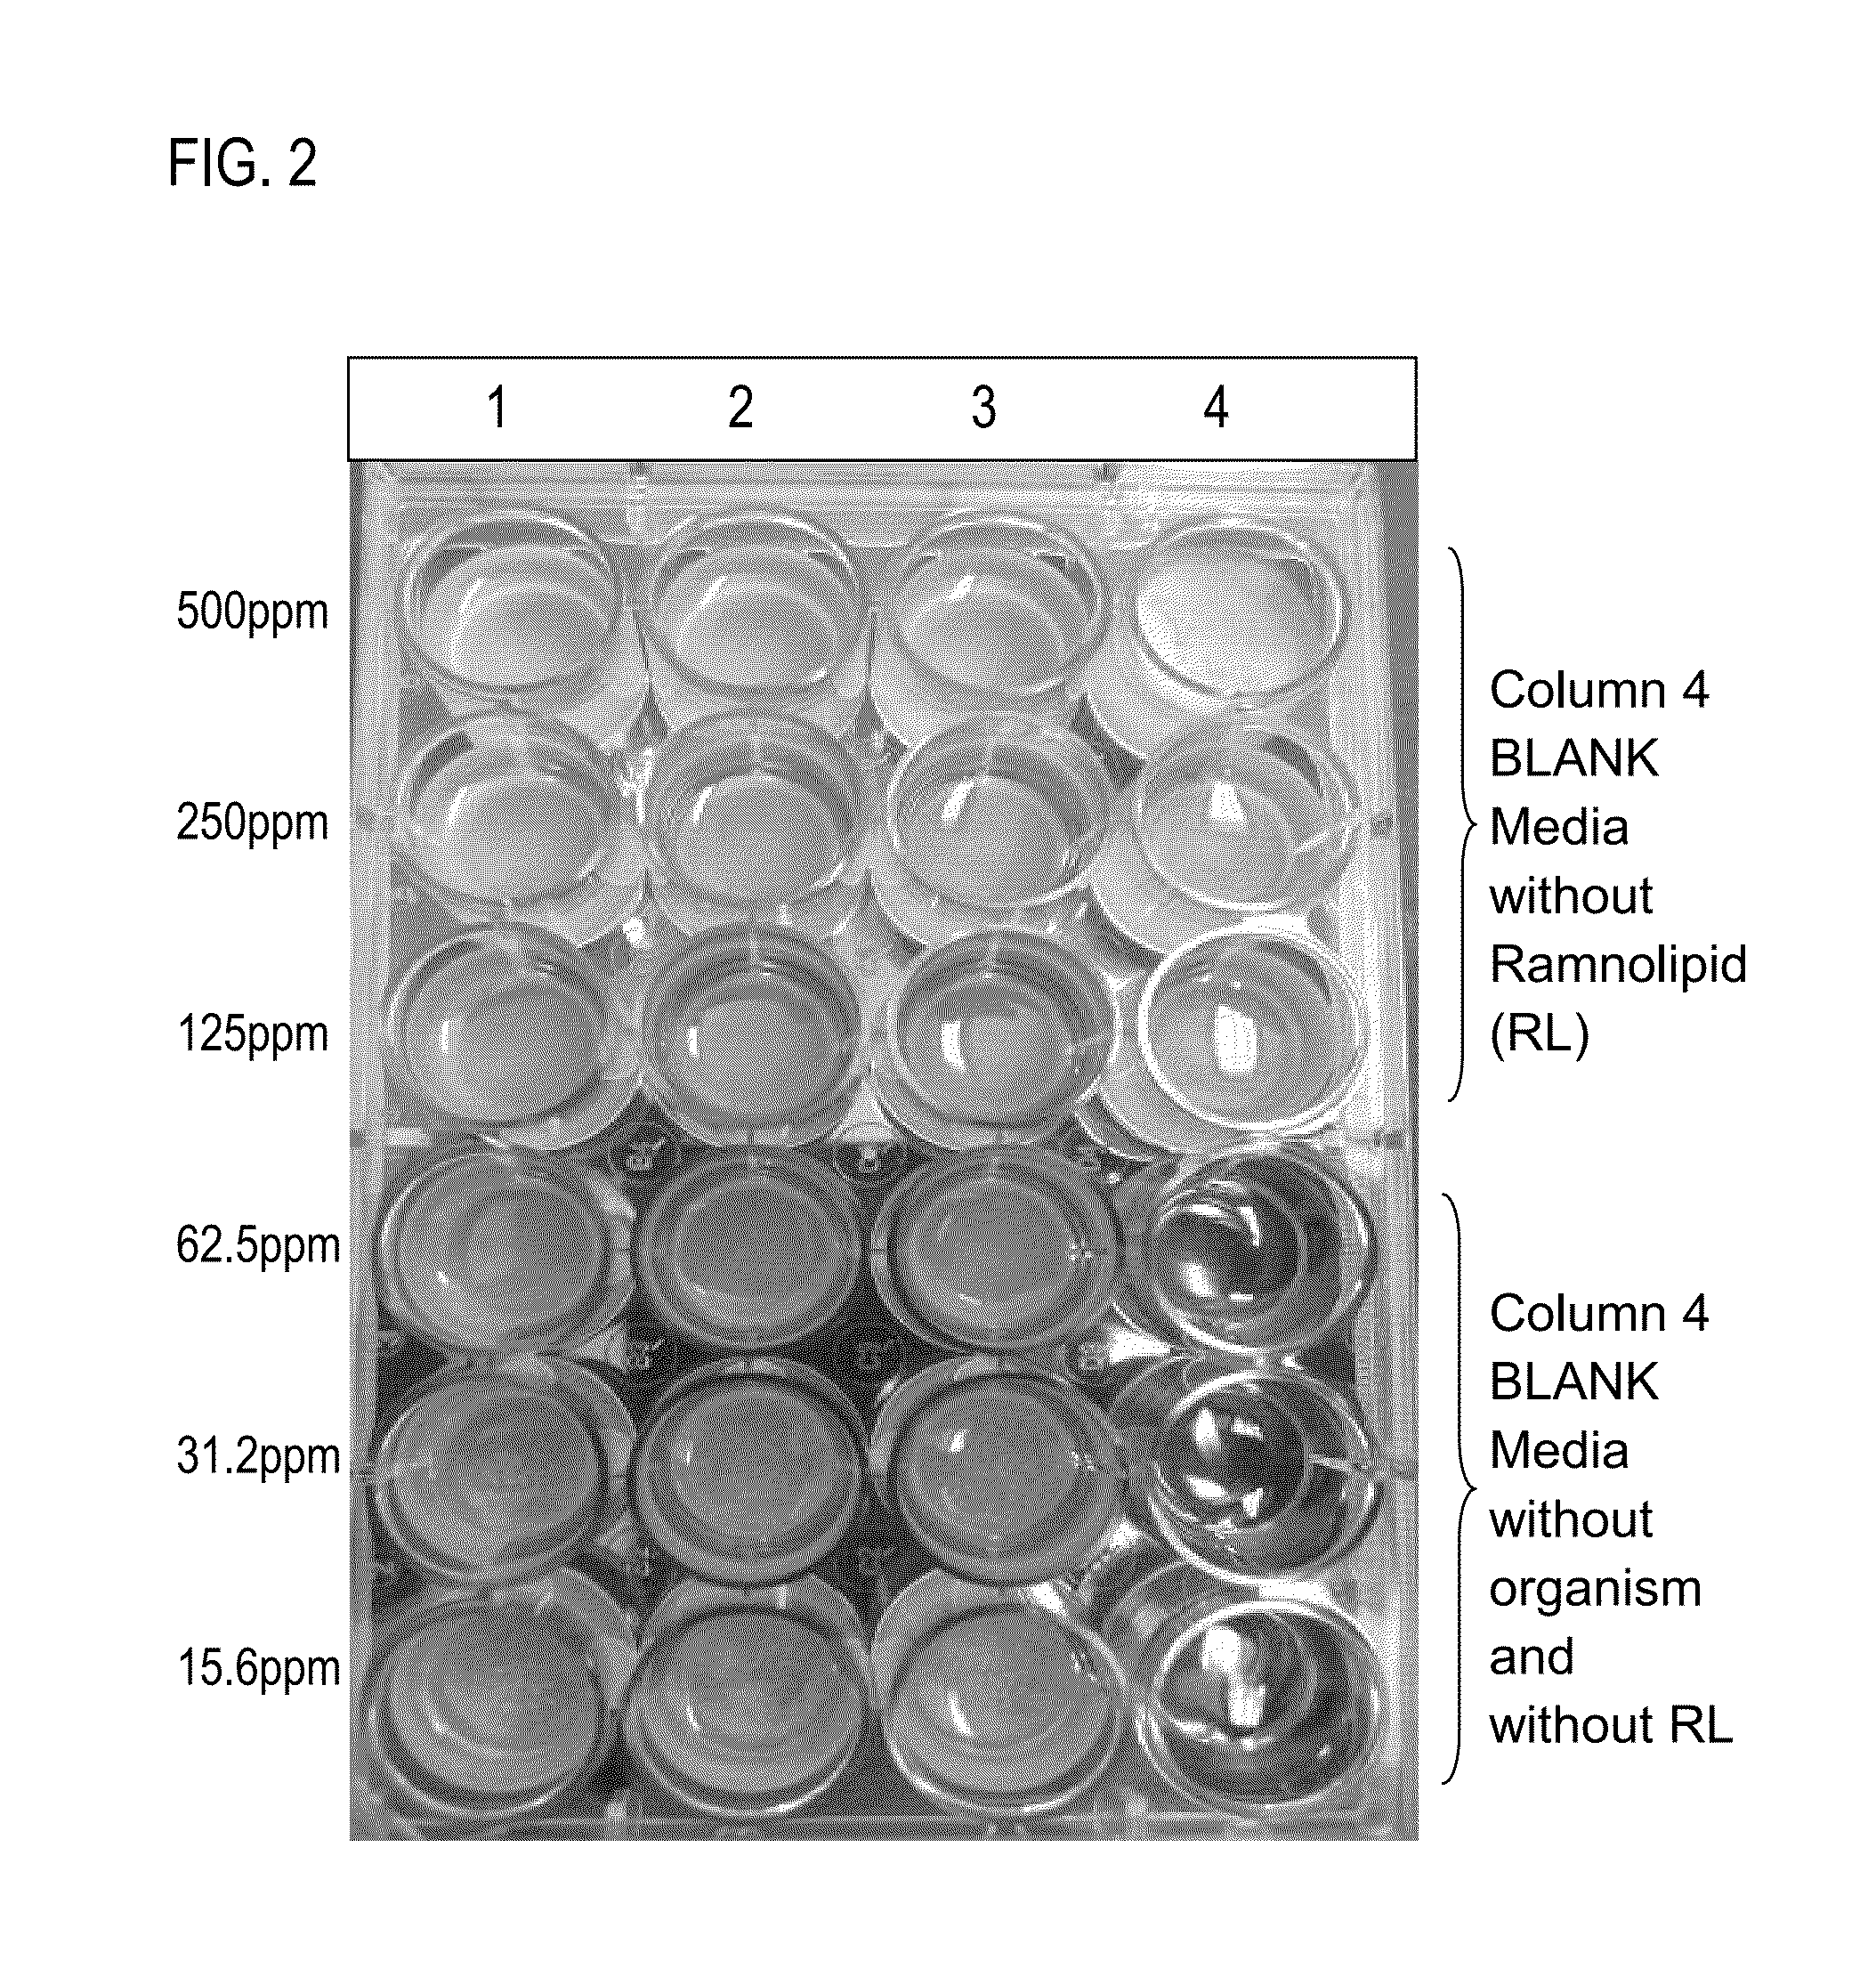 Aqueous coatings and paints incorporating one or more antimicrobial biosurfactants and methods for using same